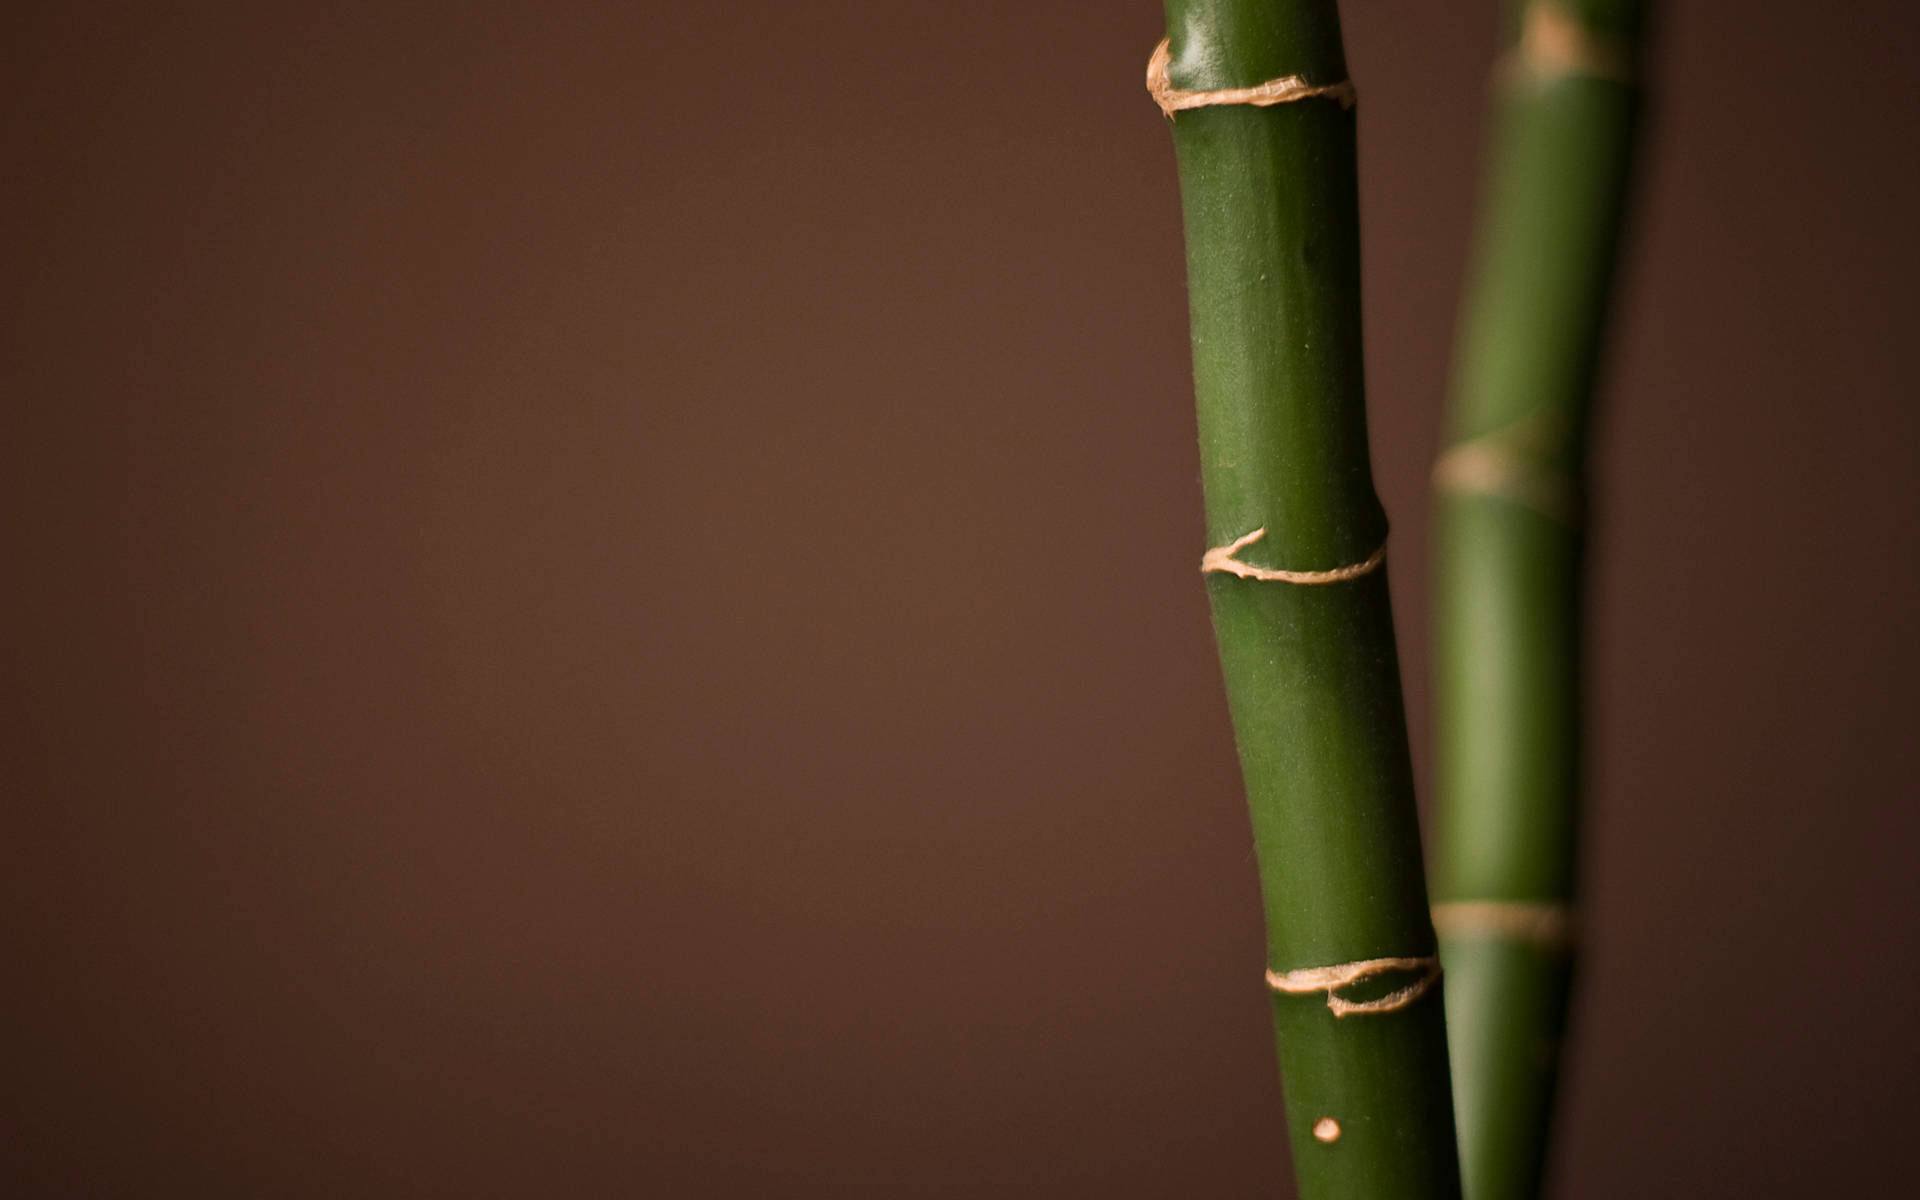 Two Bamboo Sticks Background